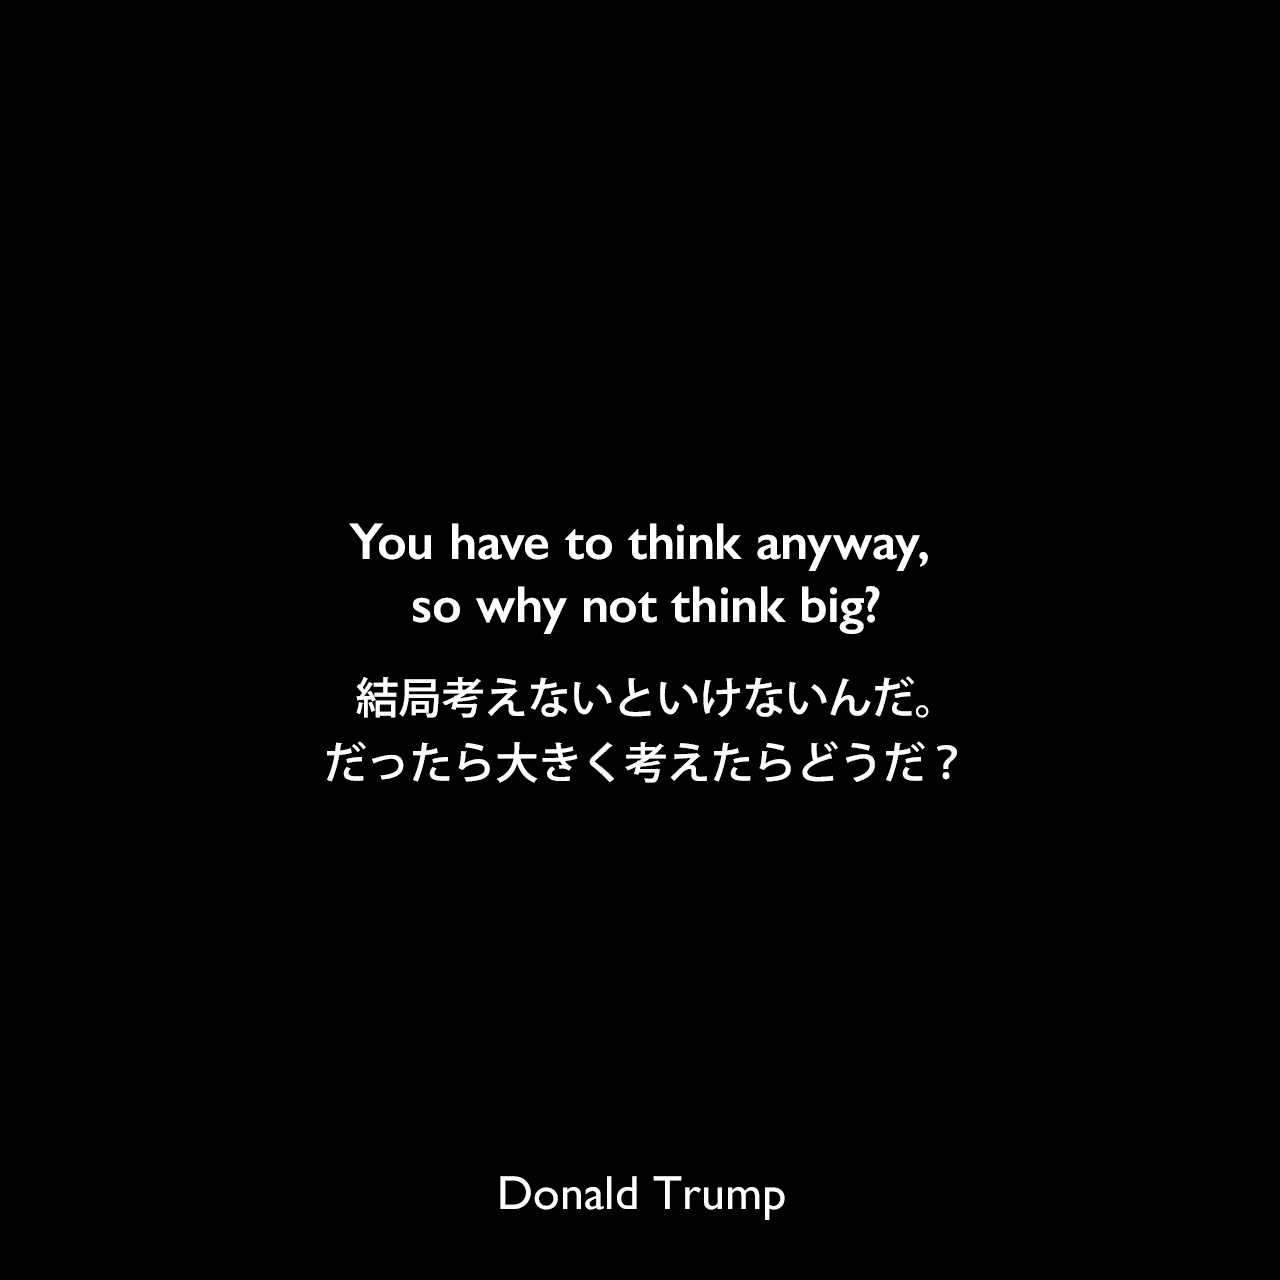 You have to think anyway, so why not think big?結局考えないといけないんだ。だったら大きく考えたらどうだ？Donald Trump